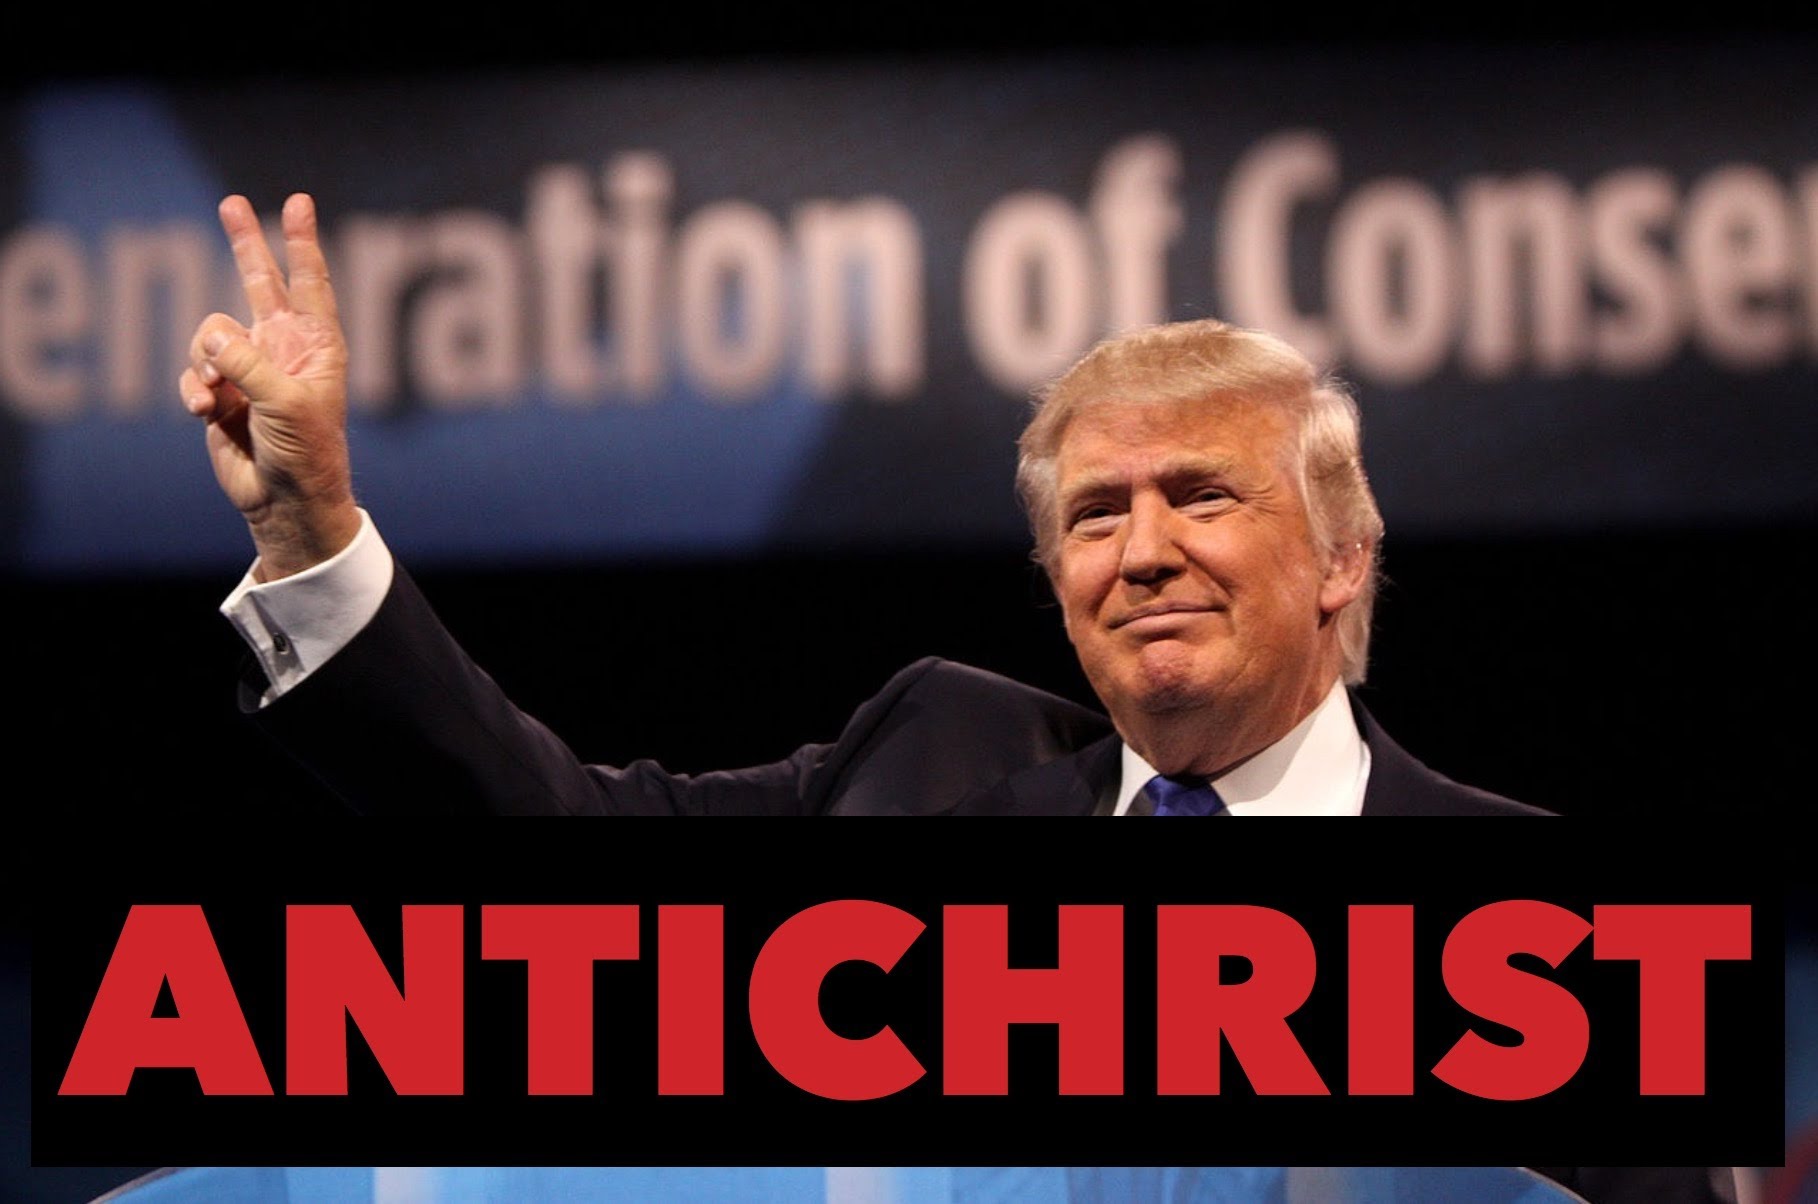 Is Donald Trump The Antichrist? (Special Documentary)